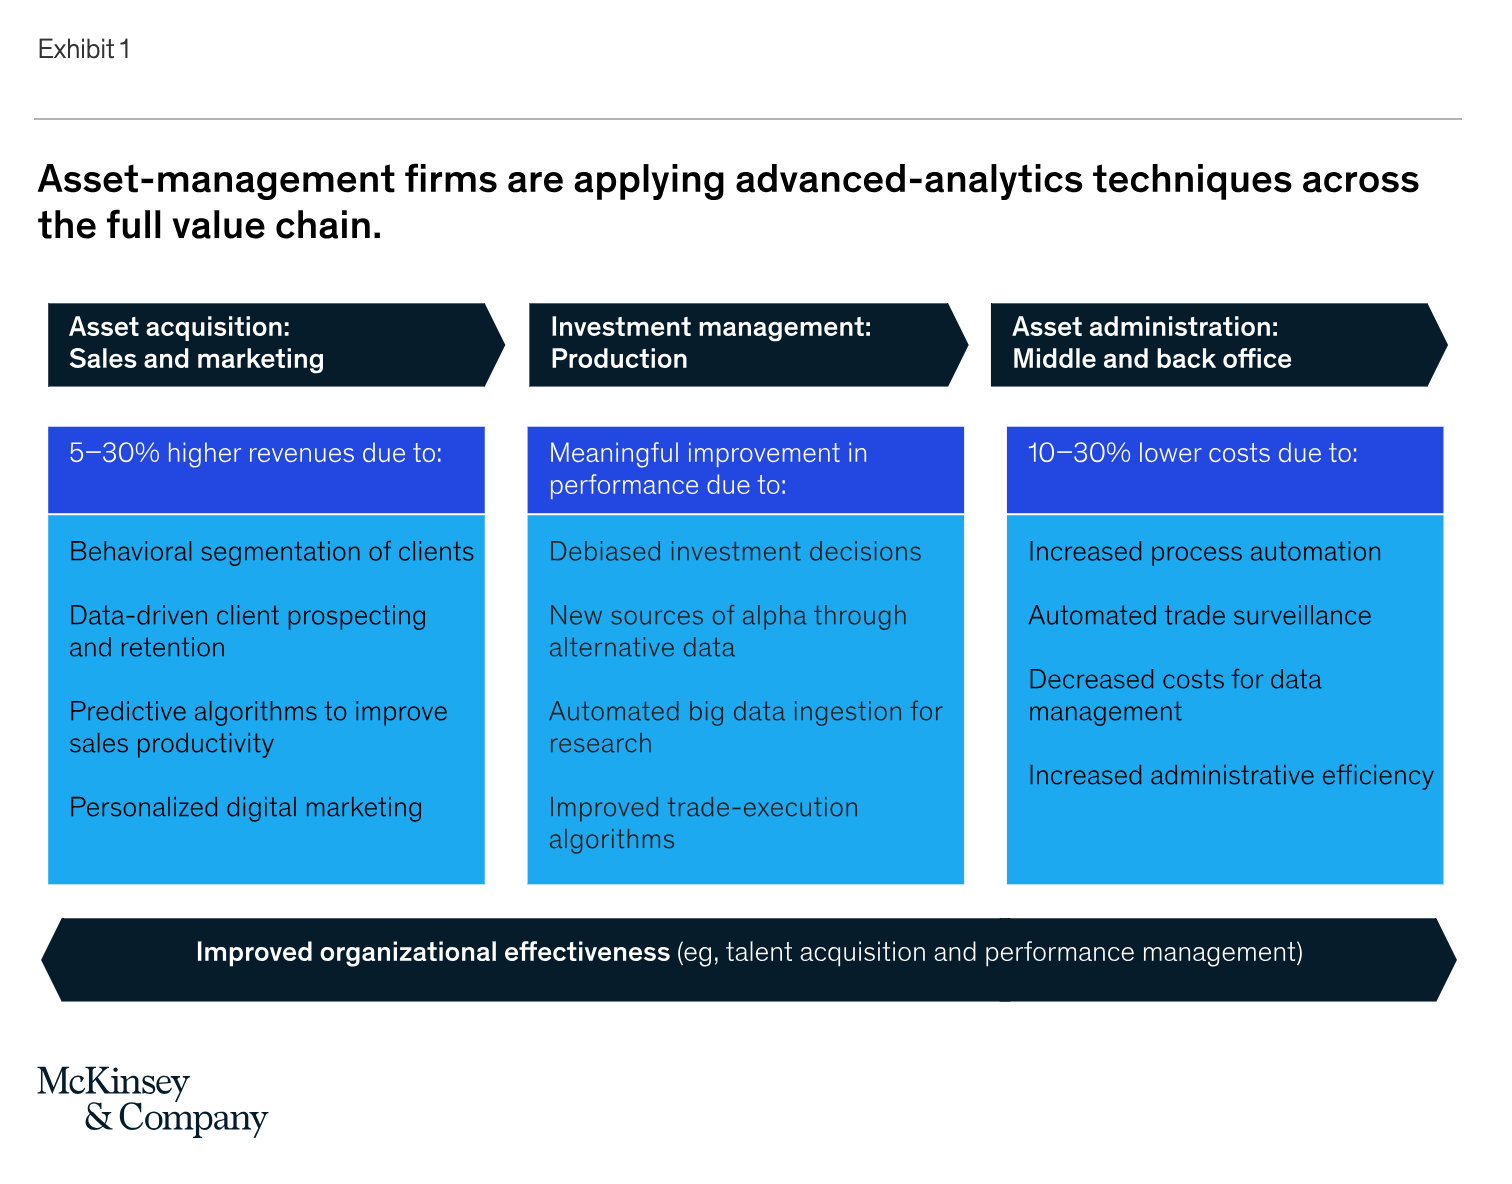 Advanced Analytics in Asset Management - The Big Picture